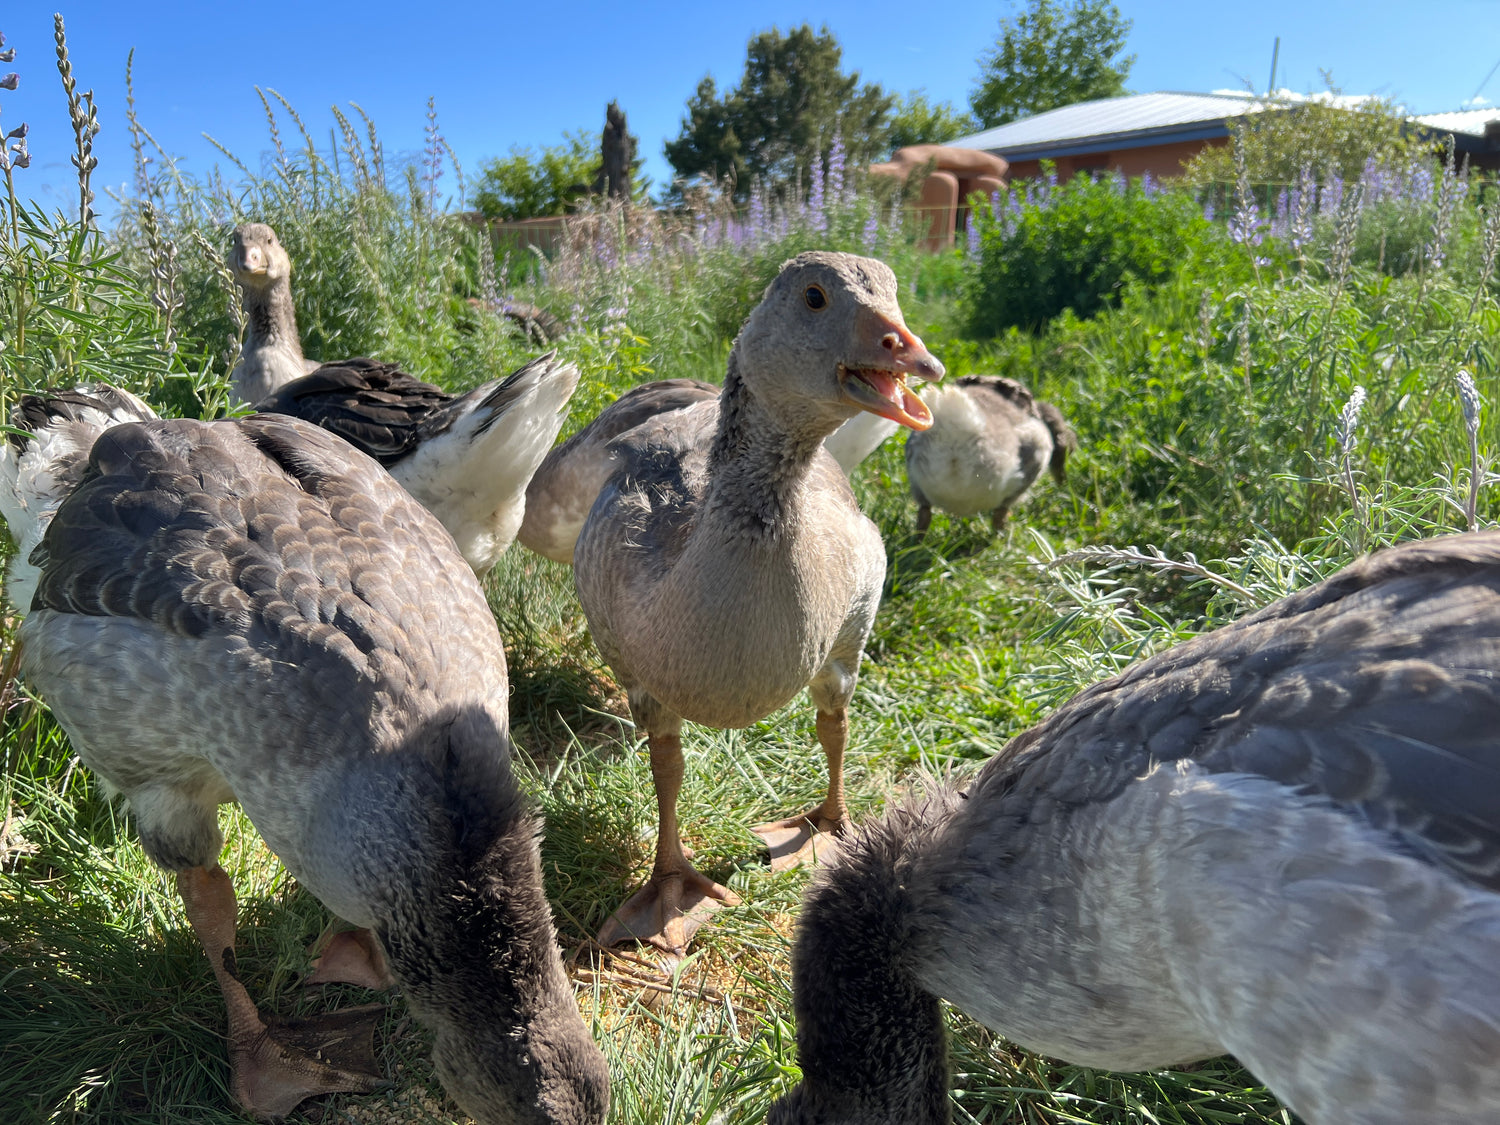 The geese feeding on a variety of insects and larvae, effectively reducing the population of pests.